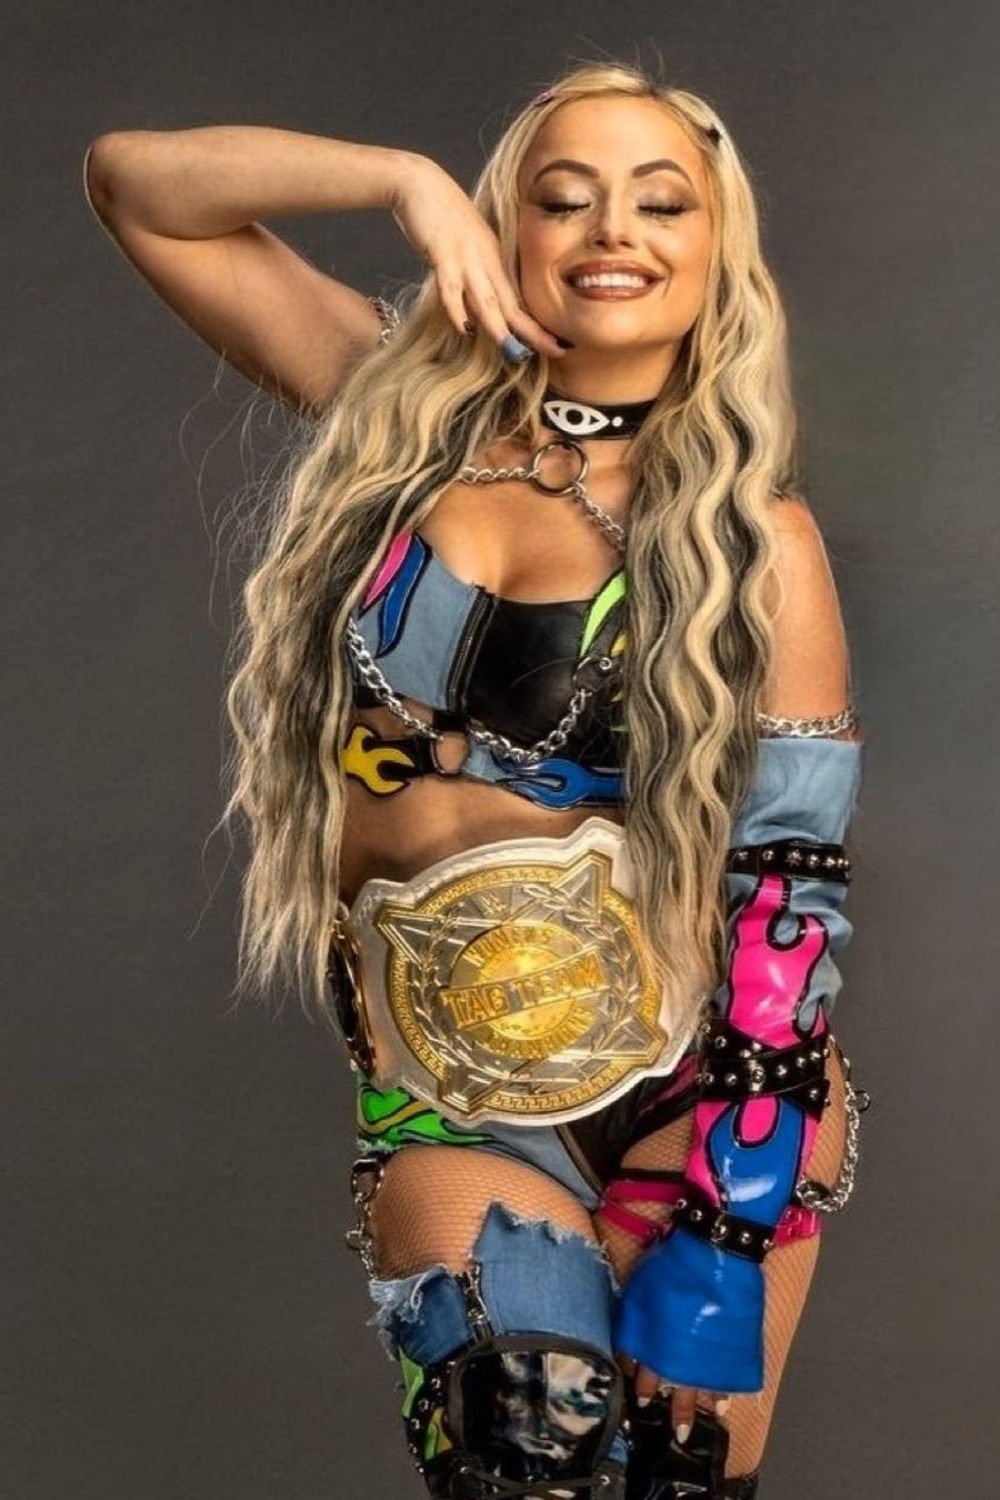 An extremely talented and beautiful wrestler; Liv Morgan